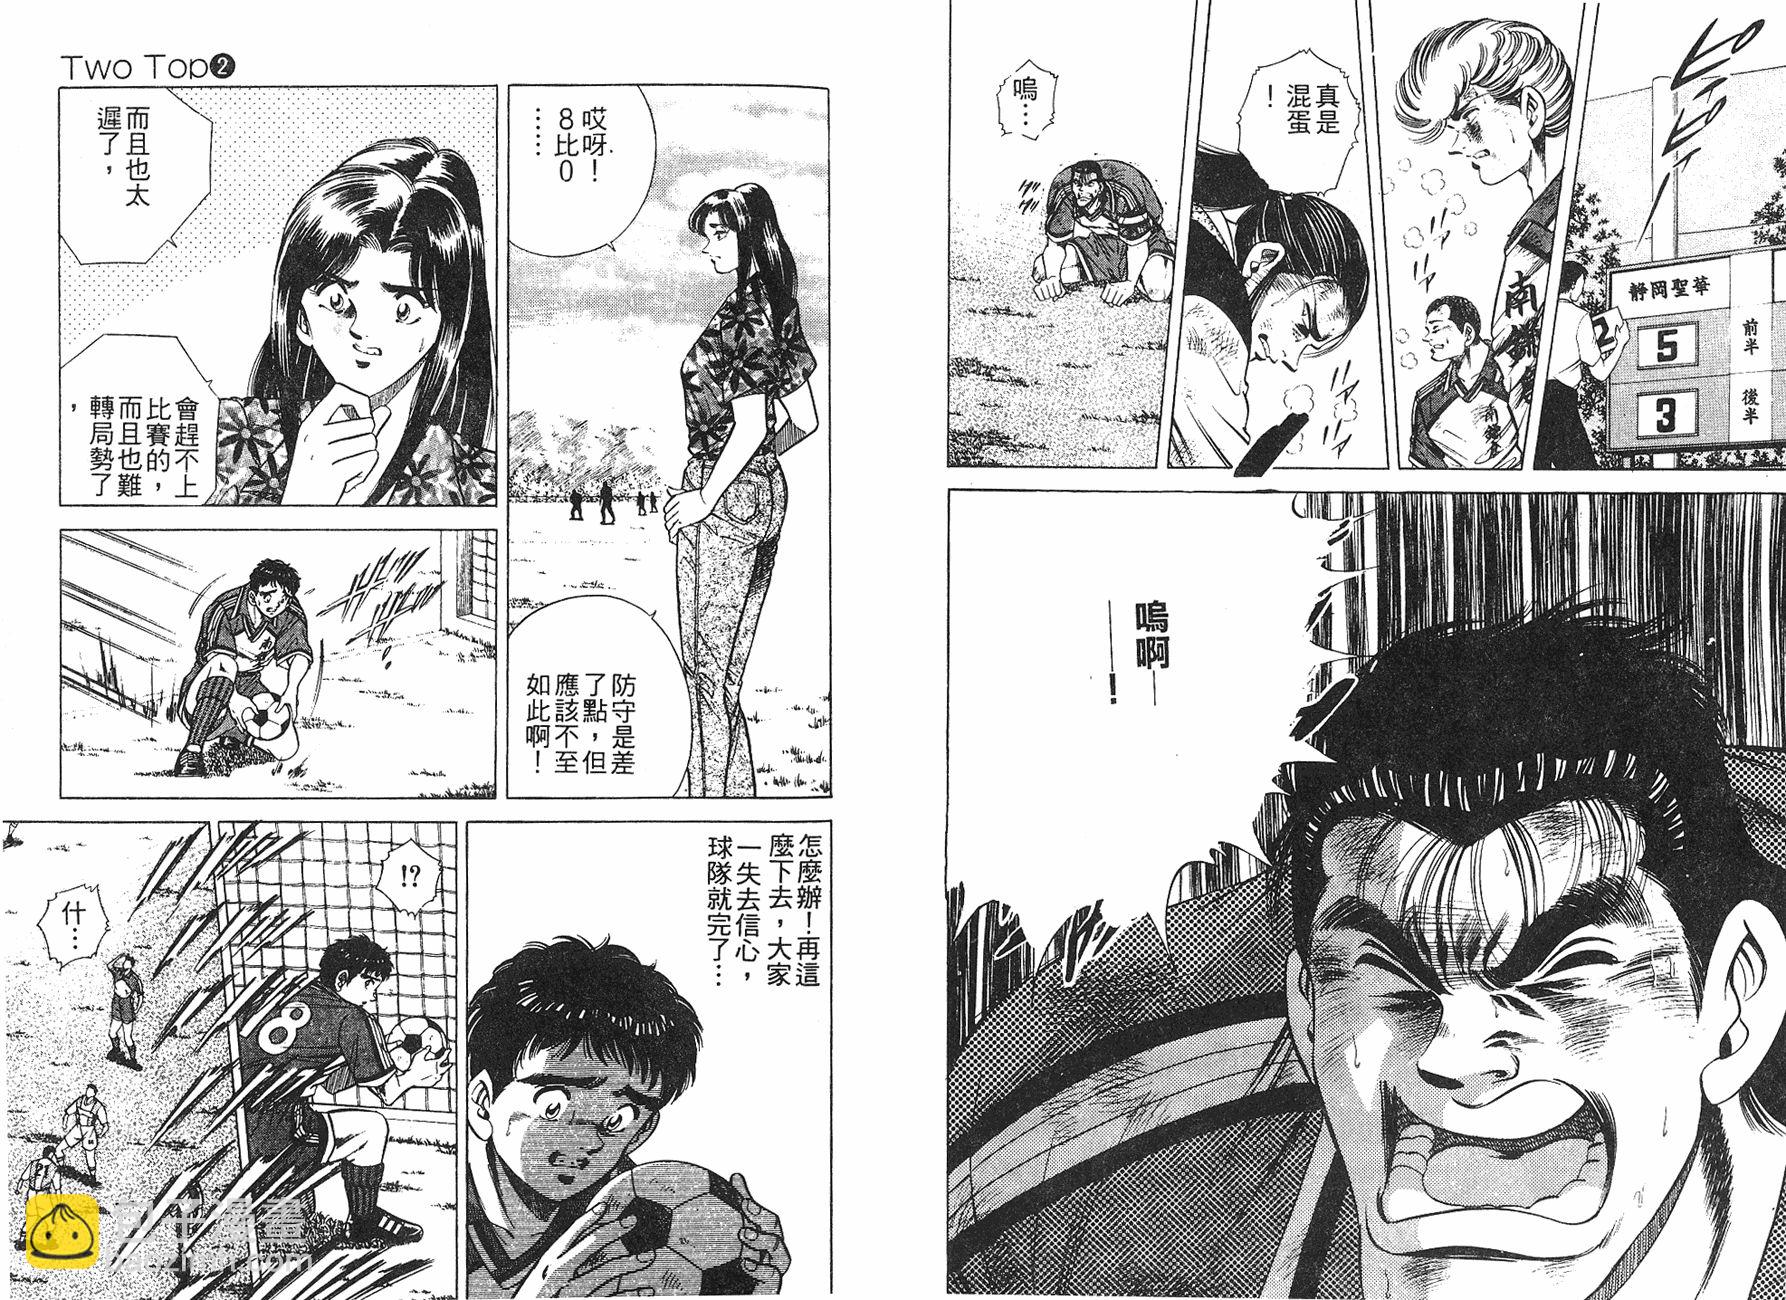 Two Top - 第02卷(1/3) - 3